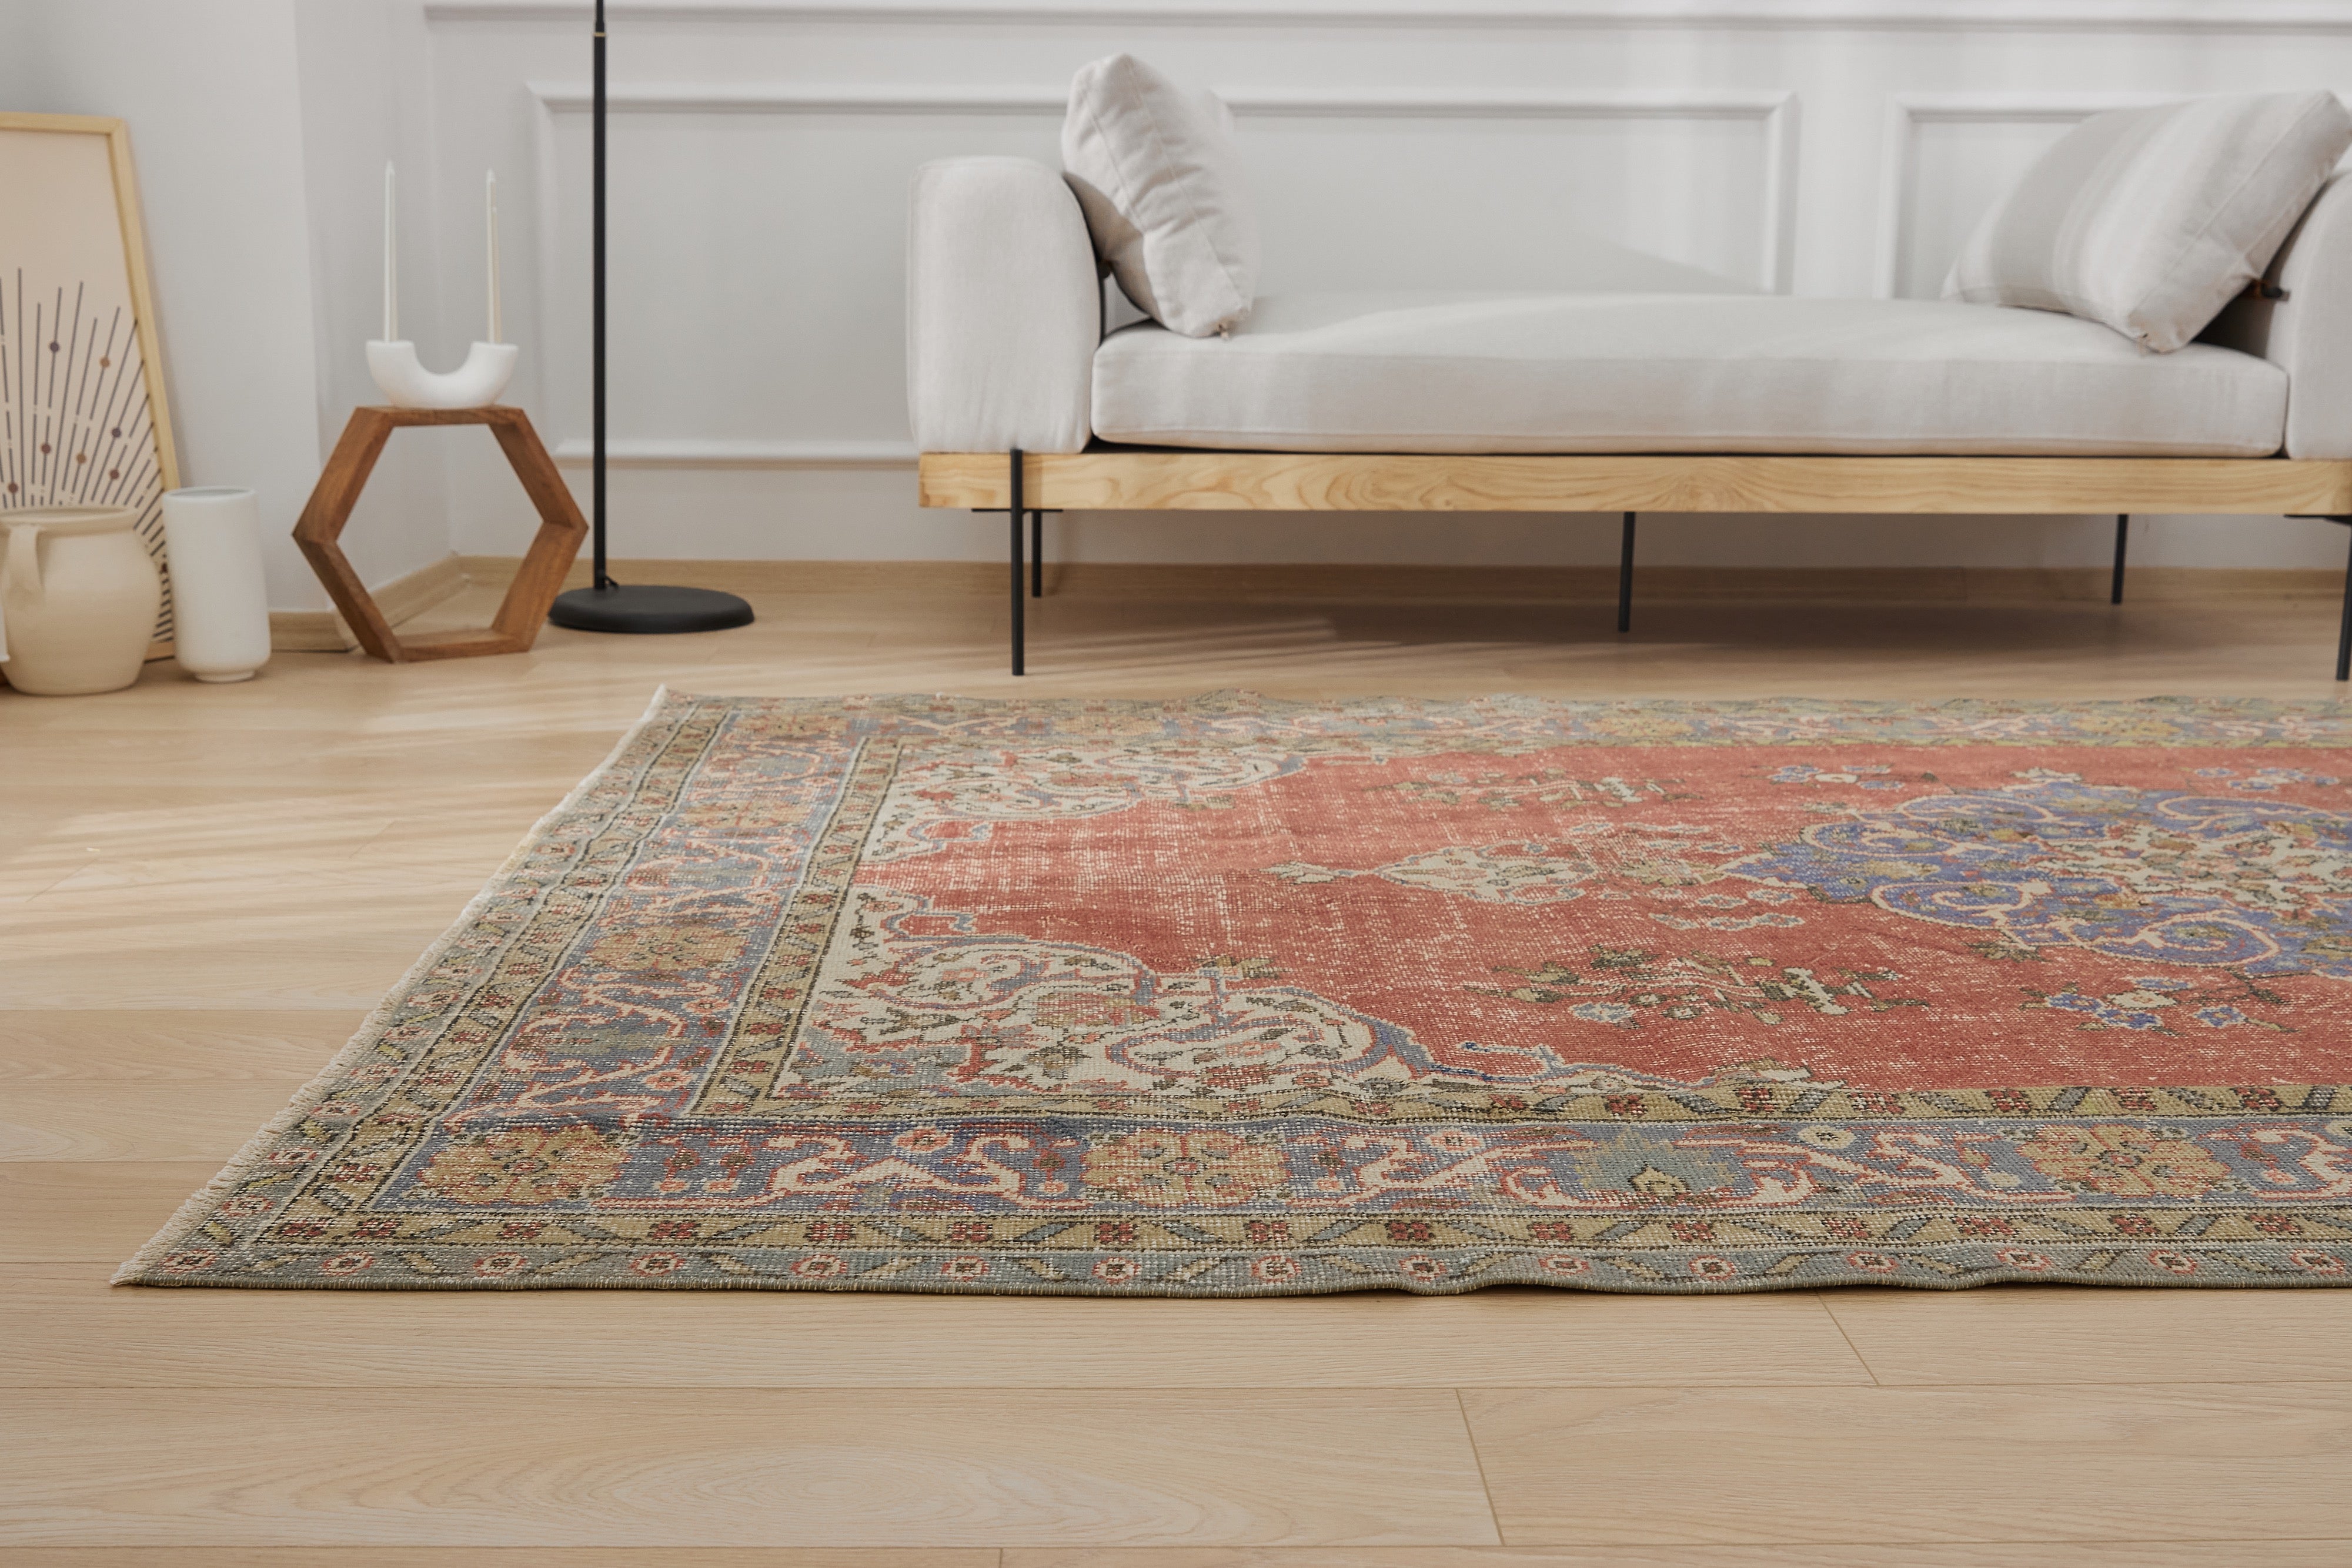 Jocelyn's Charm | Authentic Turkish Rug | Hand-Knotted Carpet | Kuden Rugs